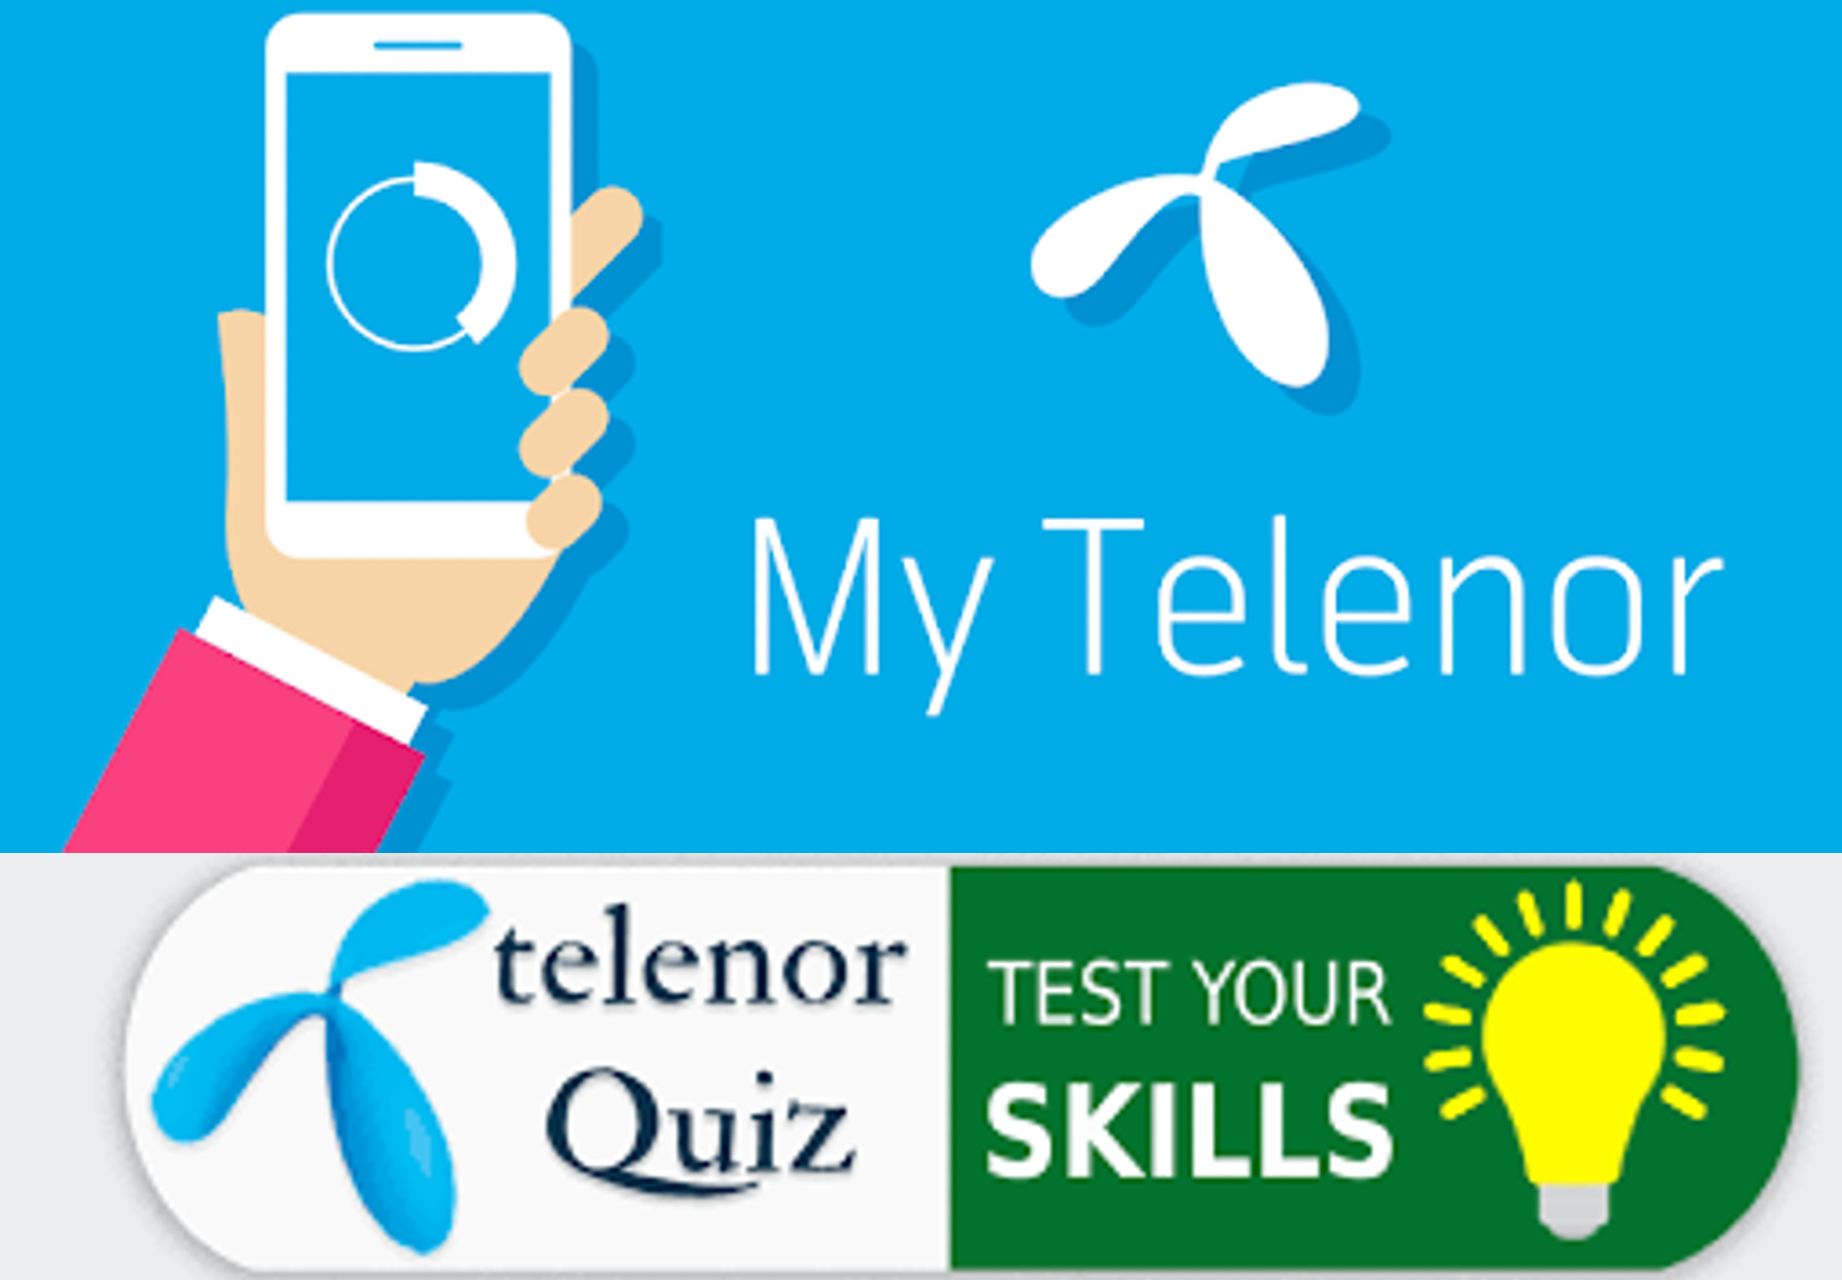 Today Telenor Answer